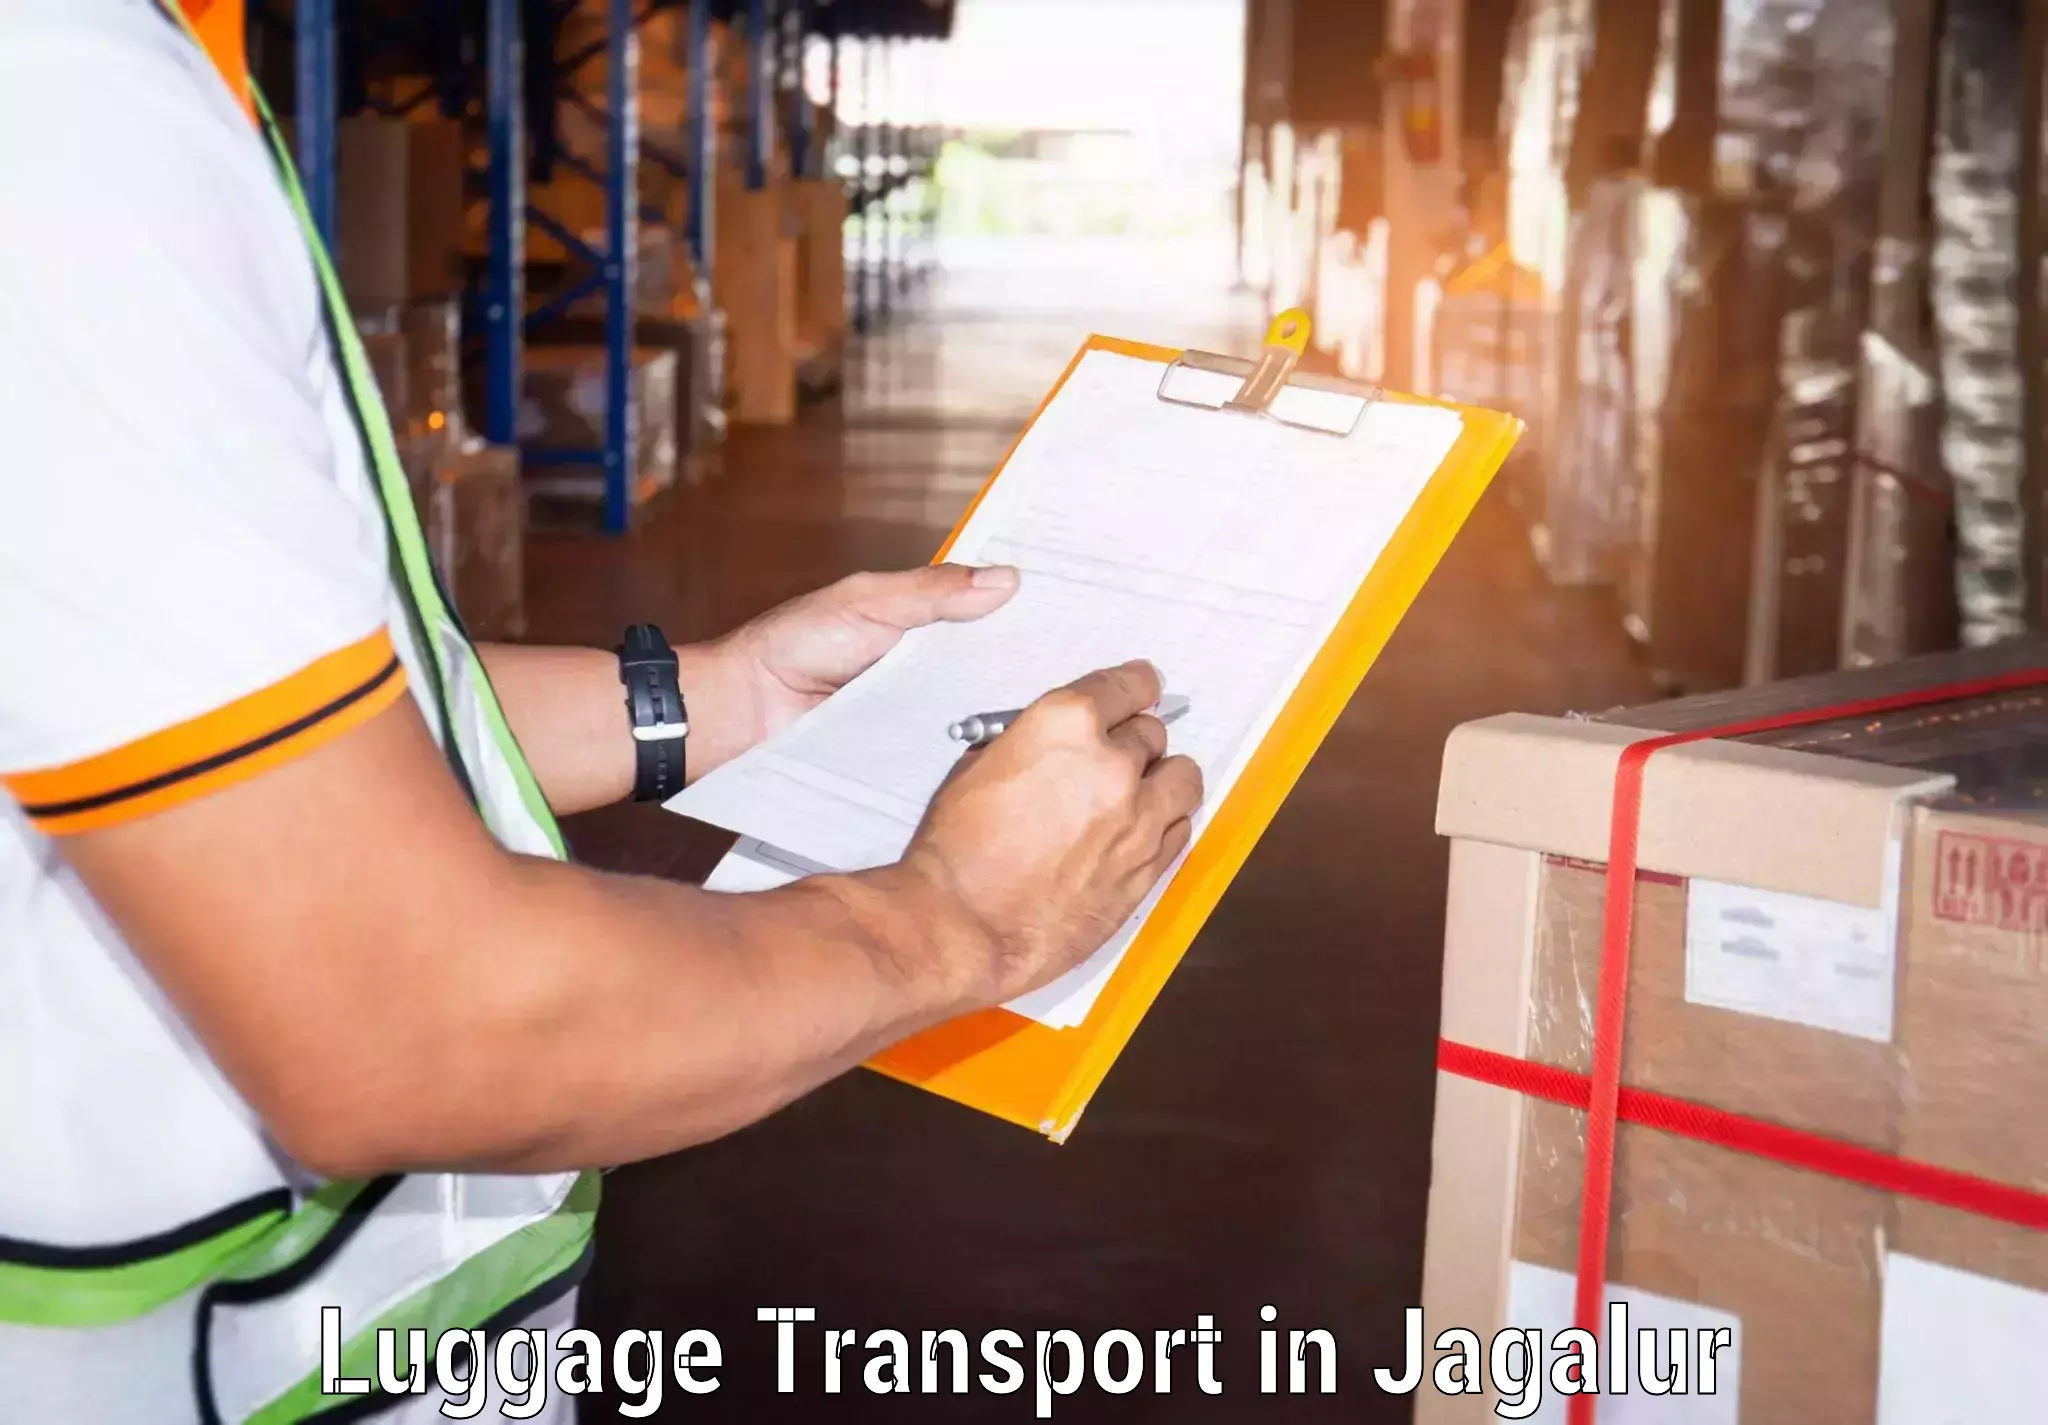 Luggage shipping consultation in Jagalur